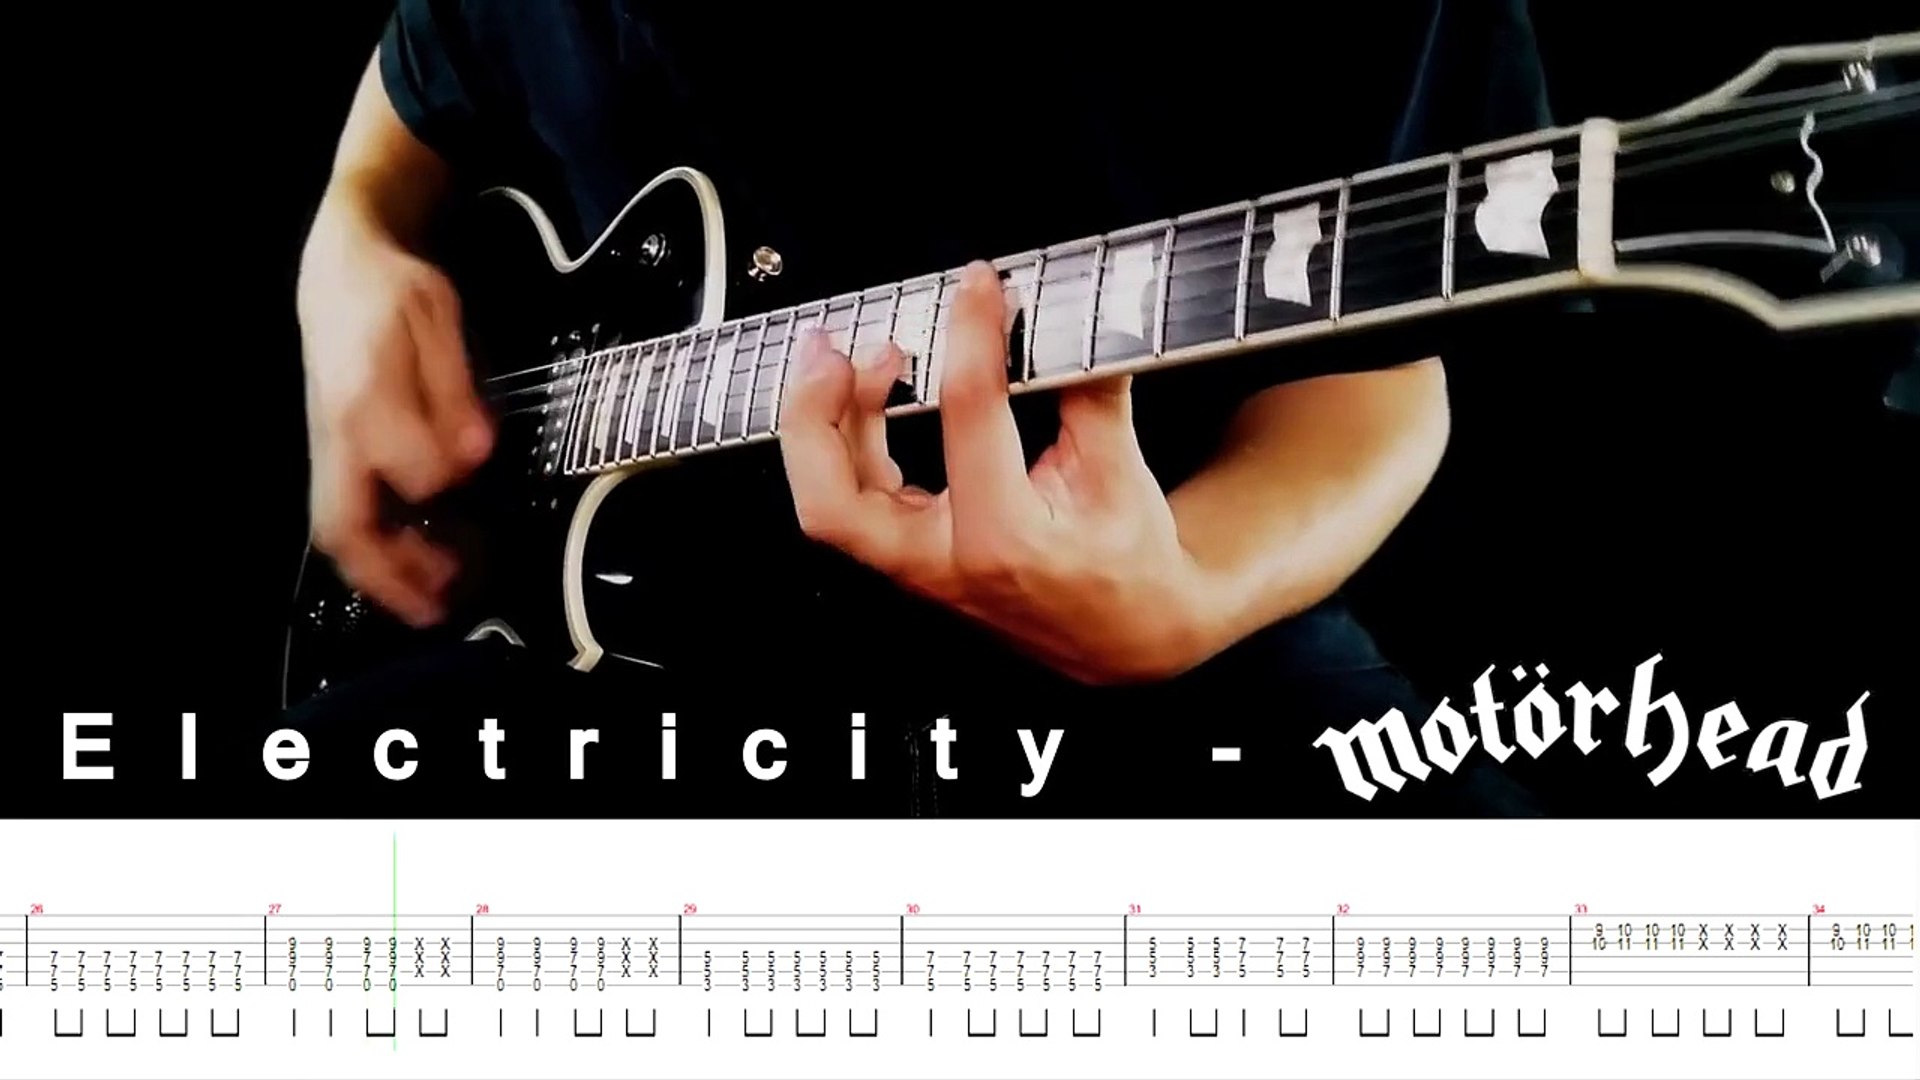 MOTORHEAD - Electricity Cover - Guitar Lesson With TABS - video Dailymotion